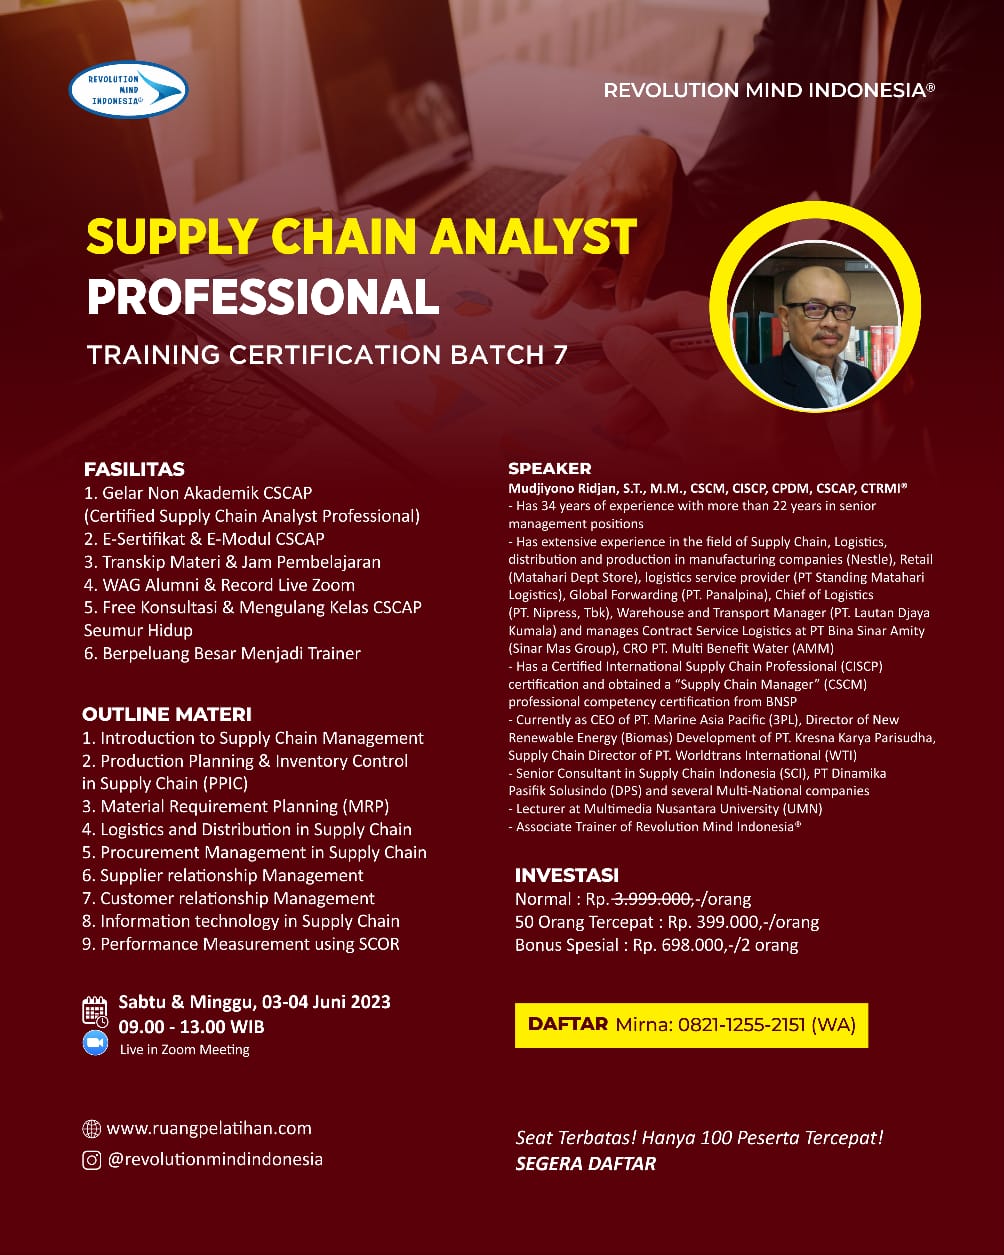 SUPPLY CHAIN ANALYST PROFESSIONAL TRAINING CERTIFICATION